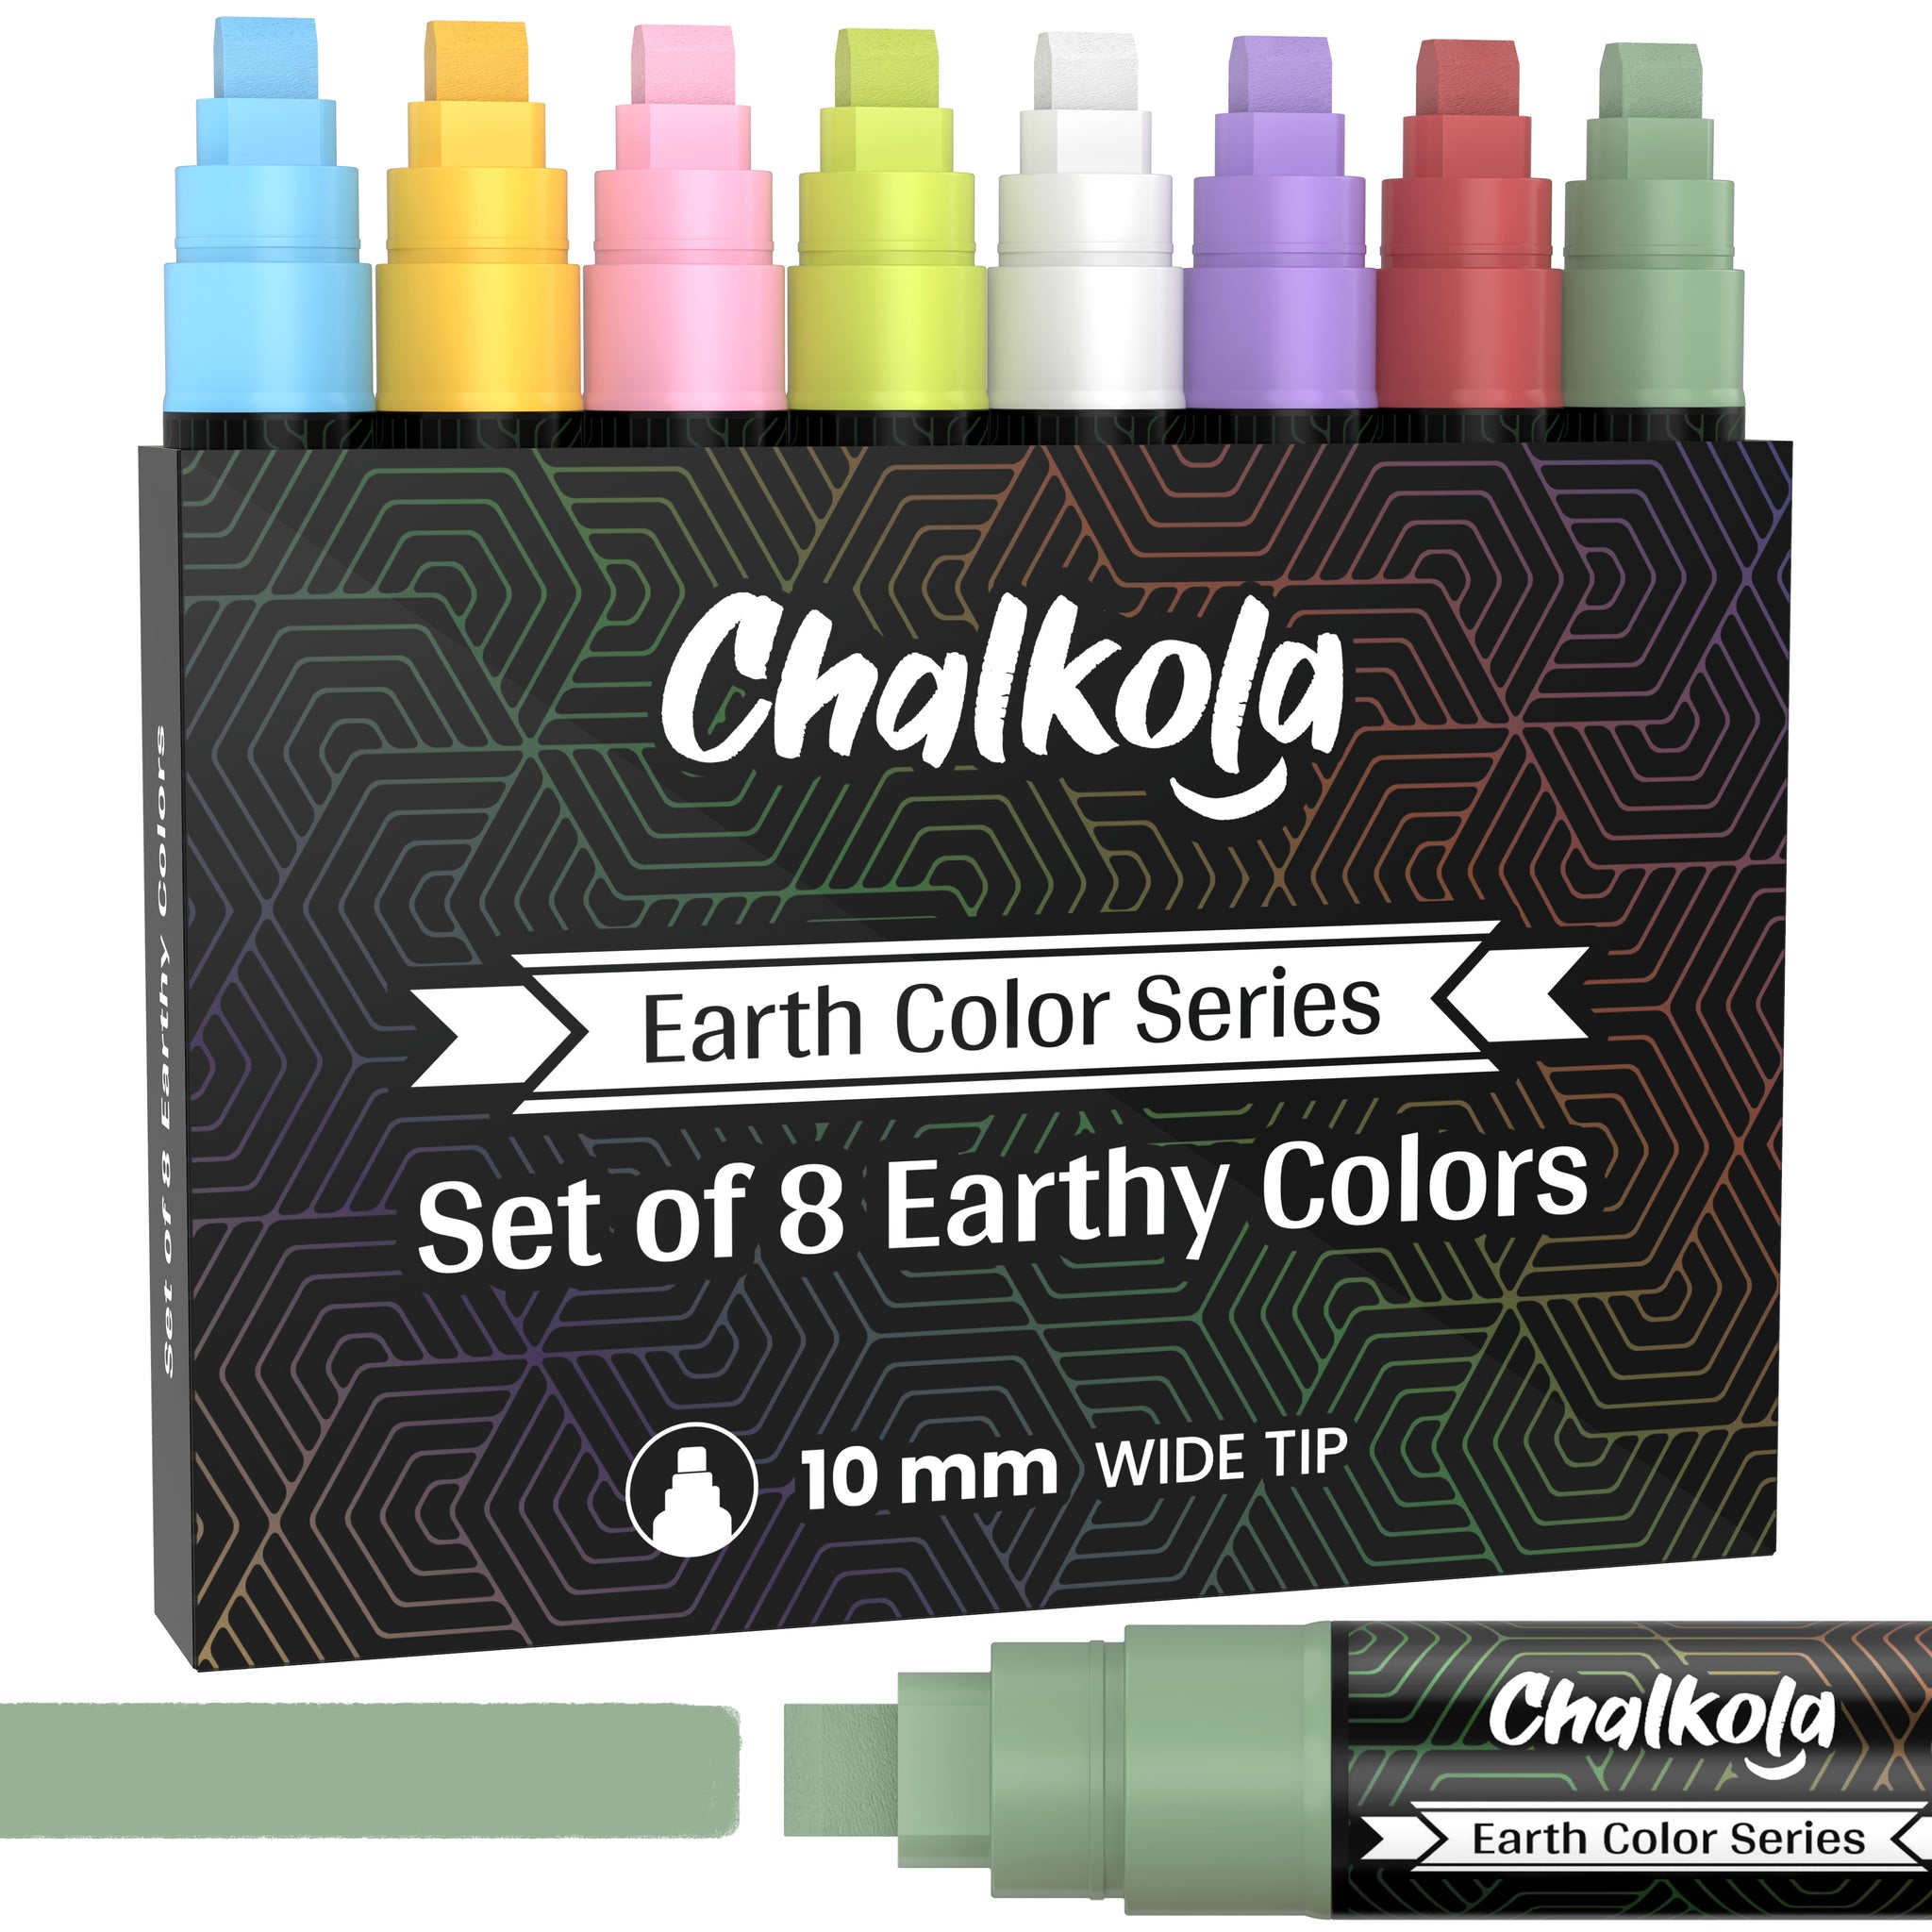 White Chalk Ink Markers with 6mm Reversible Nib - Pack of 5 Pens - Chalkola  Art Supply